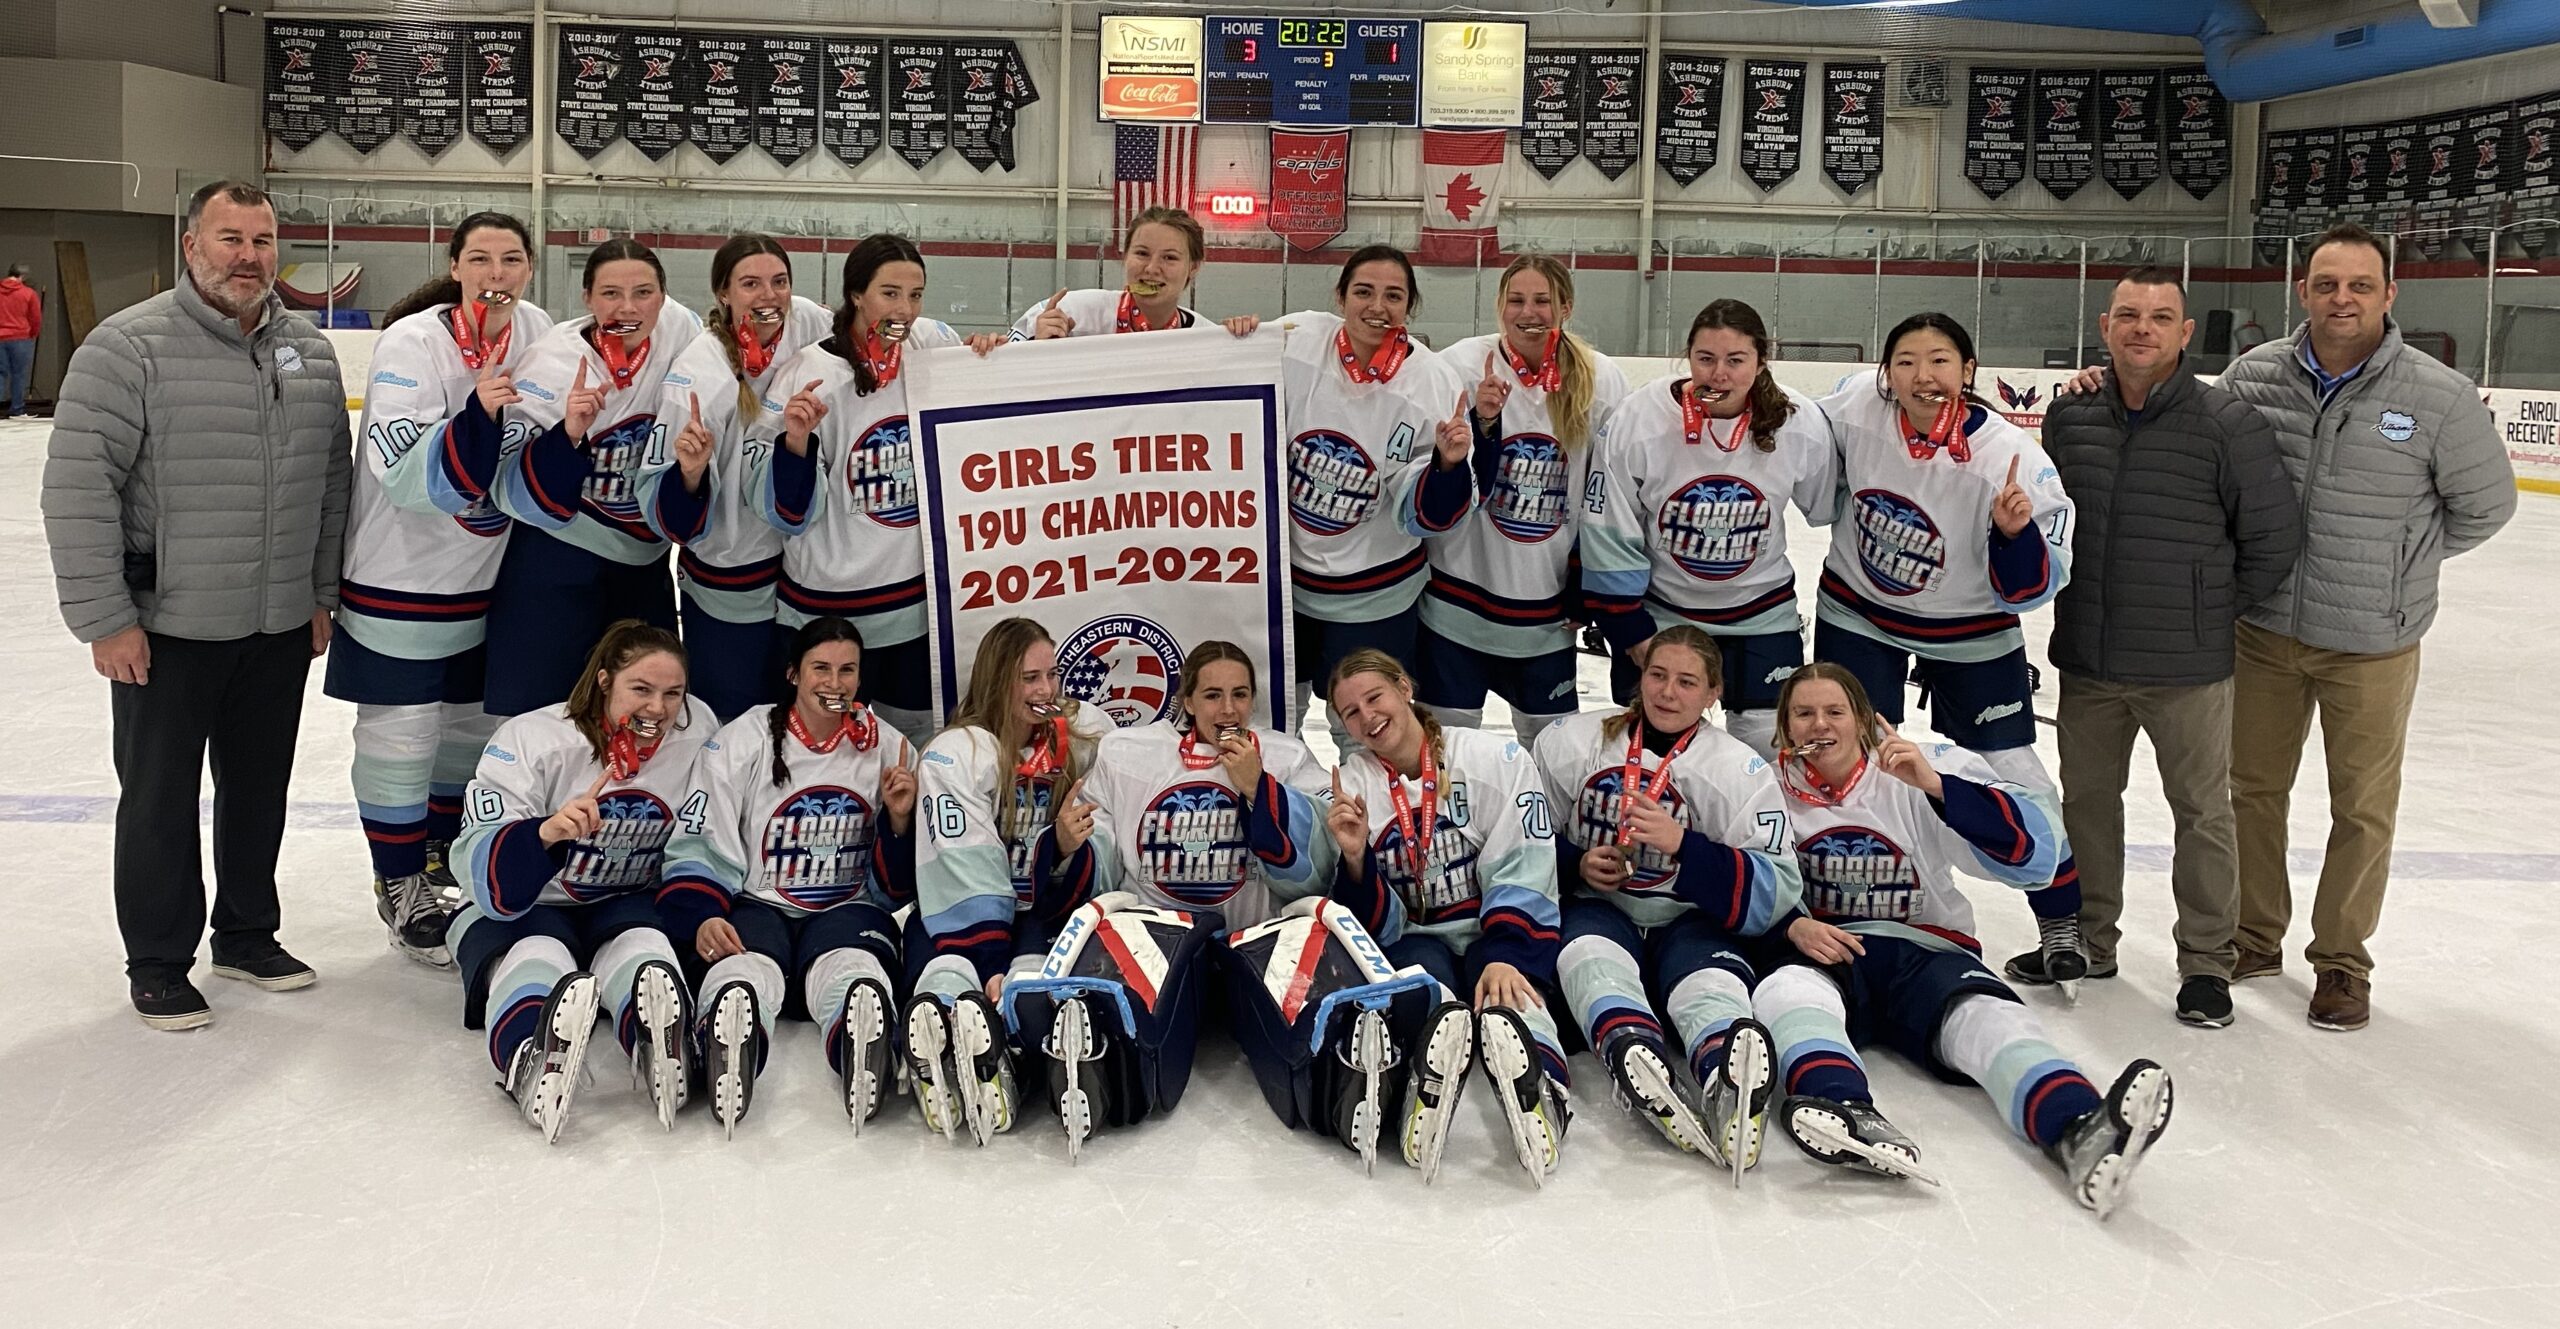 Florida Alliance Girls Hockey competed at Southeastern Districts with 5